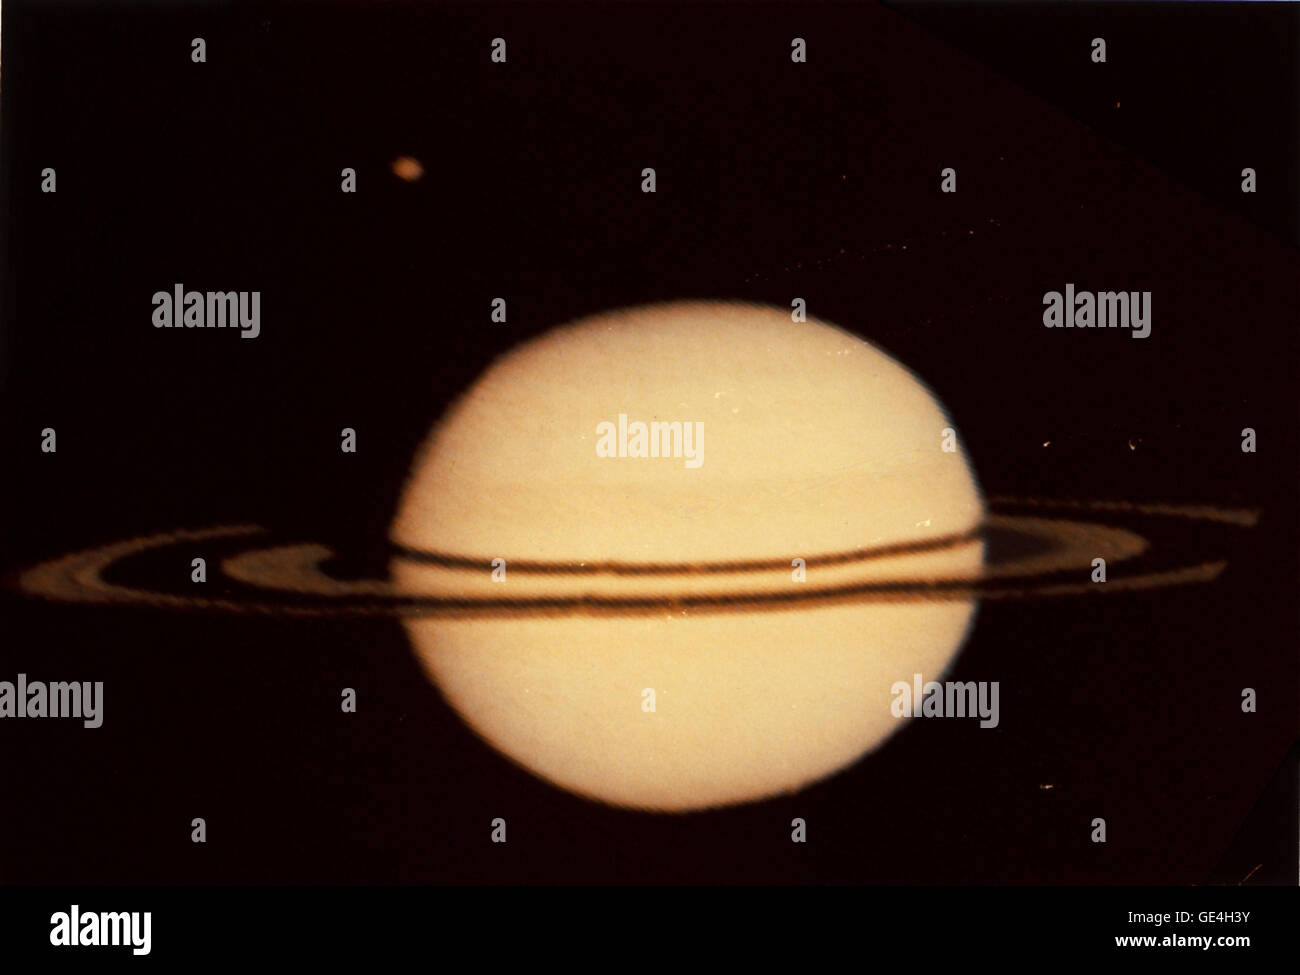 Description: (August 26, 1979) NASA's Pioneer 11 image of Saturn and its moon Titan at the upper left. The irregularities in ring silhouette and shadow are due to technical anomalies in the preliminary data later corrected. Looking at the rings from left to right, the ring area begins with the outer A ring; the Encke Division; the inner A Ring; Cassini Division; the B Ring; the C Ring; and the innermost area where the D Ring would be. The image was made by Pioneer Saturn on Wednesday, August 26, 1979, and received on Earth at 3:19 pm PDT. Pioneer was, at that time, 2,846,000 kilometers (1,768, Stock Photo